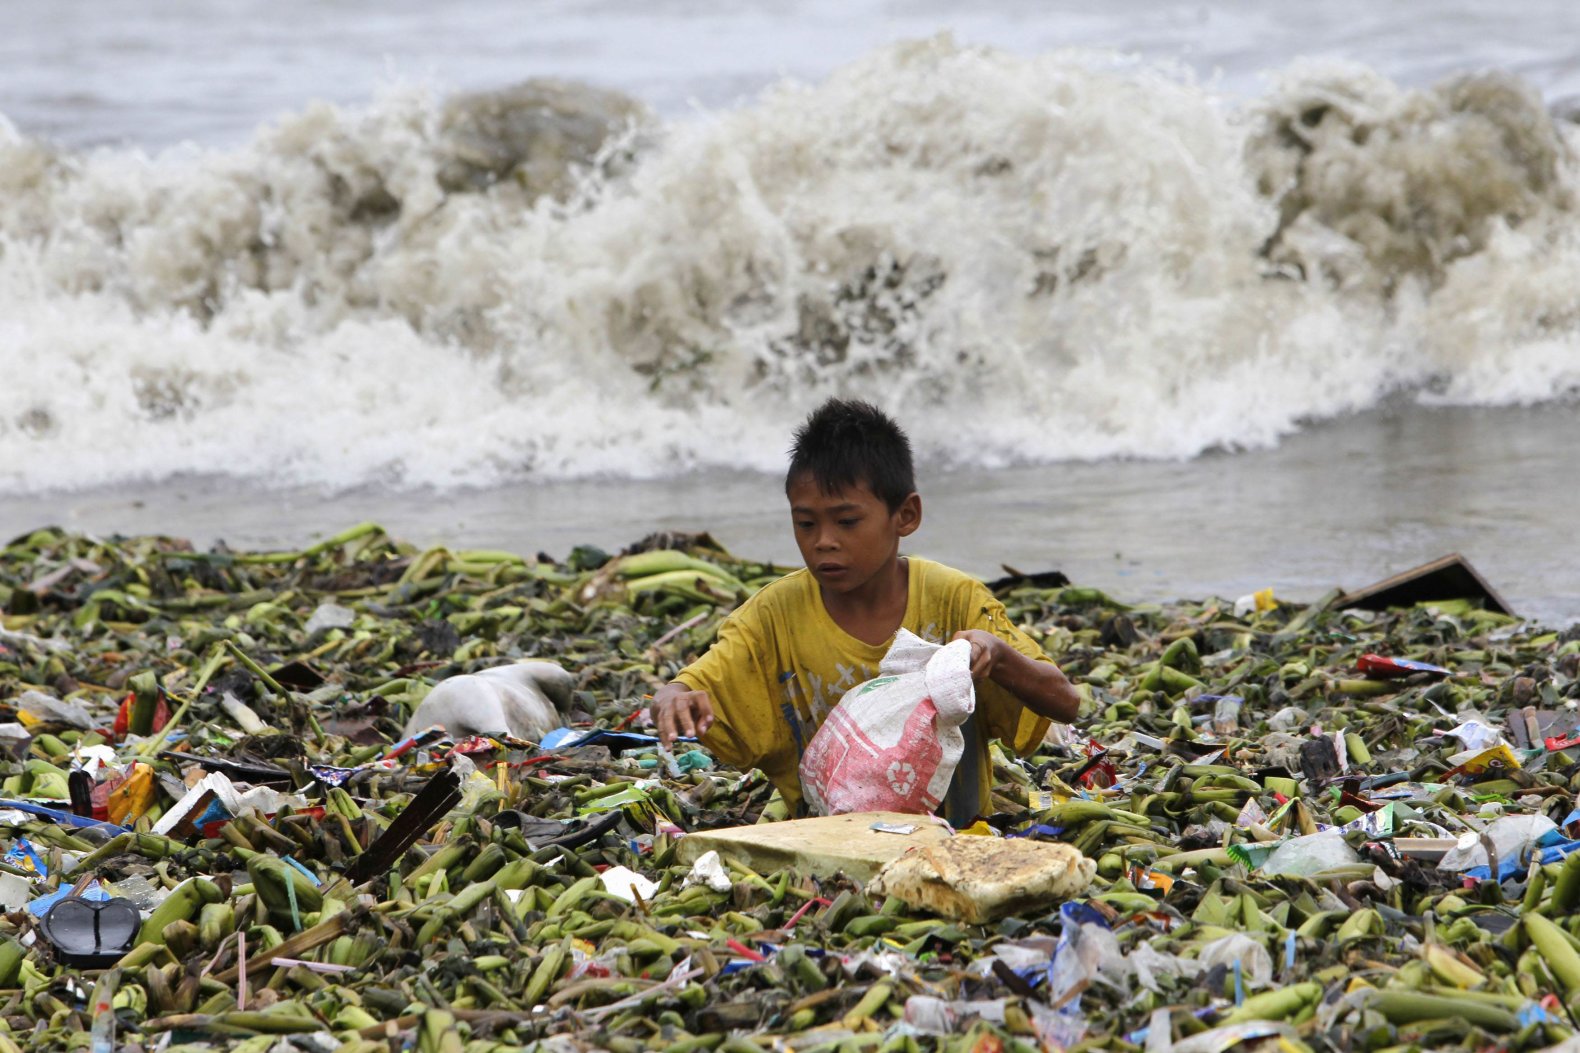 A boy sifts through floating garbage as he collects recyclable items to sell while strong waves crash along the shores of Manila Bay, near a slum area in Manila